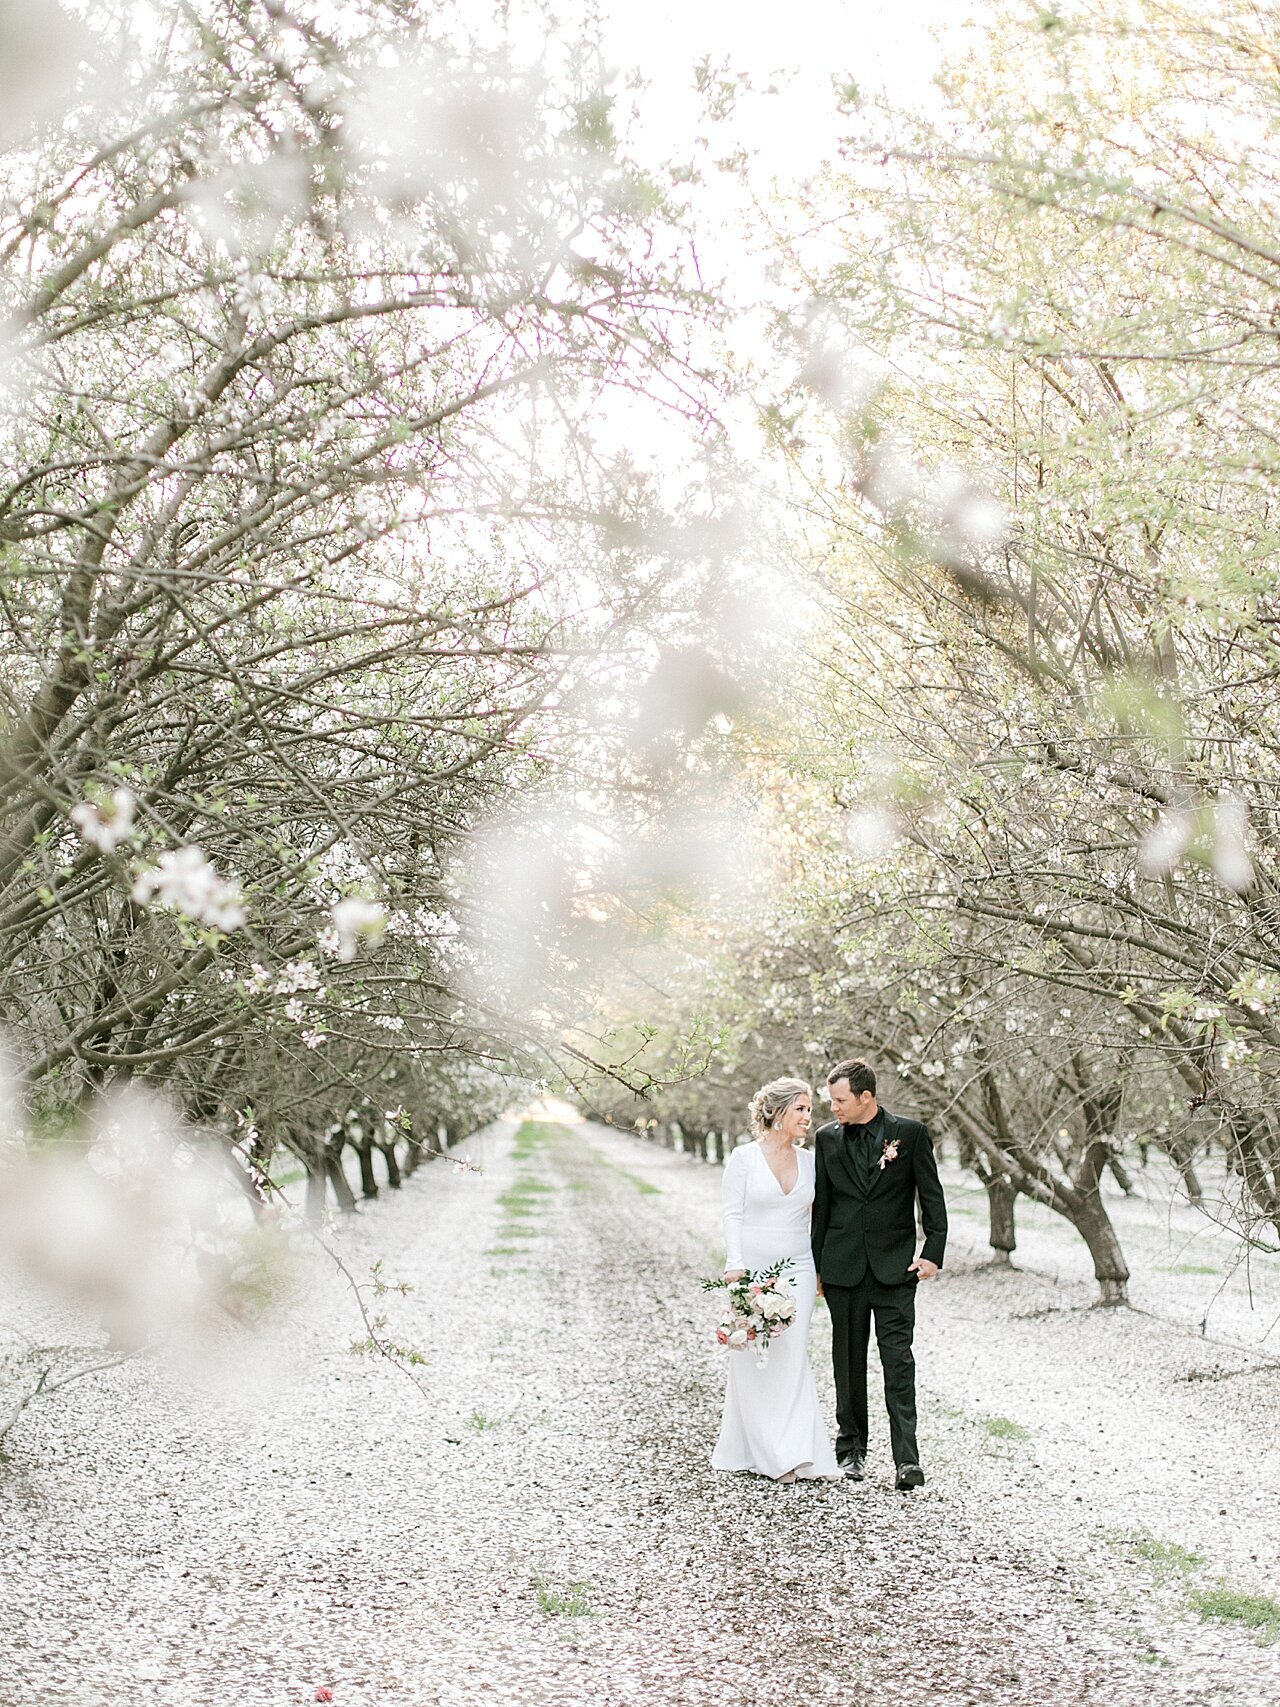 Emerald grace floral design wedding with Lauren Westra photography almond orchard bride and groom soft blush color palette central california weddings_2500